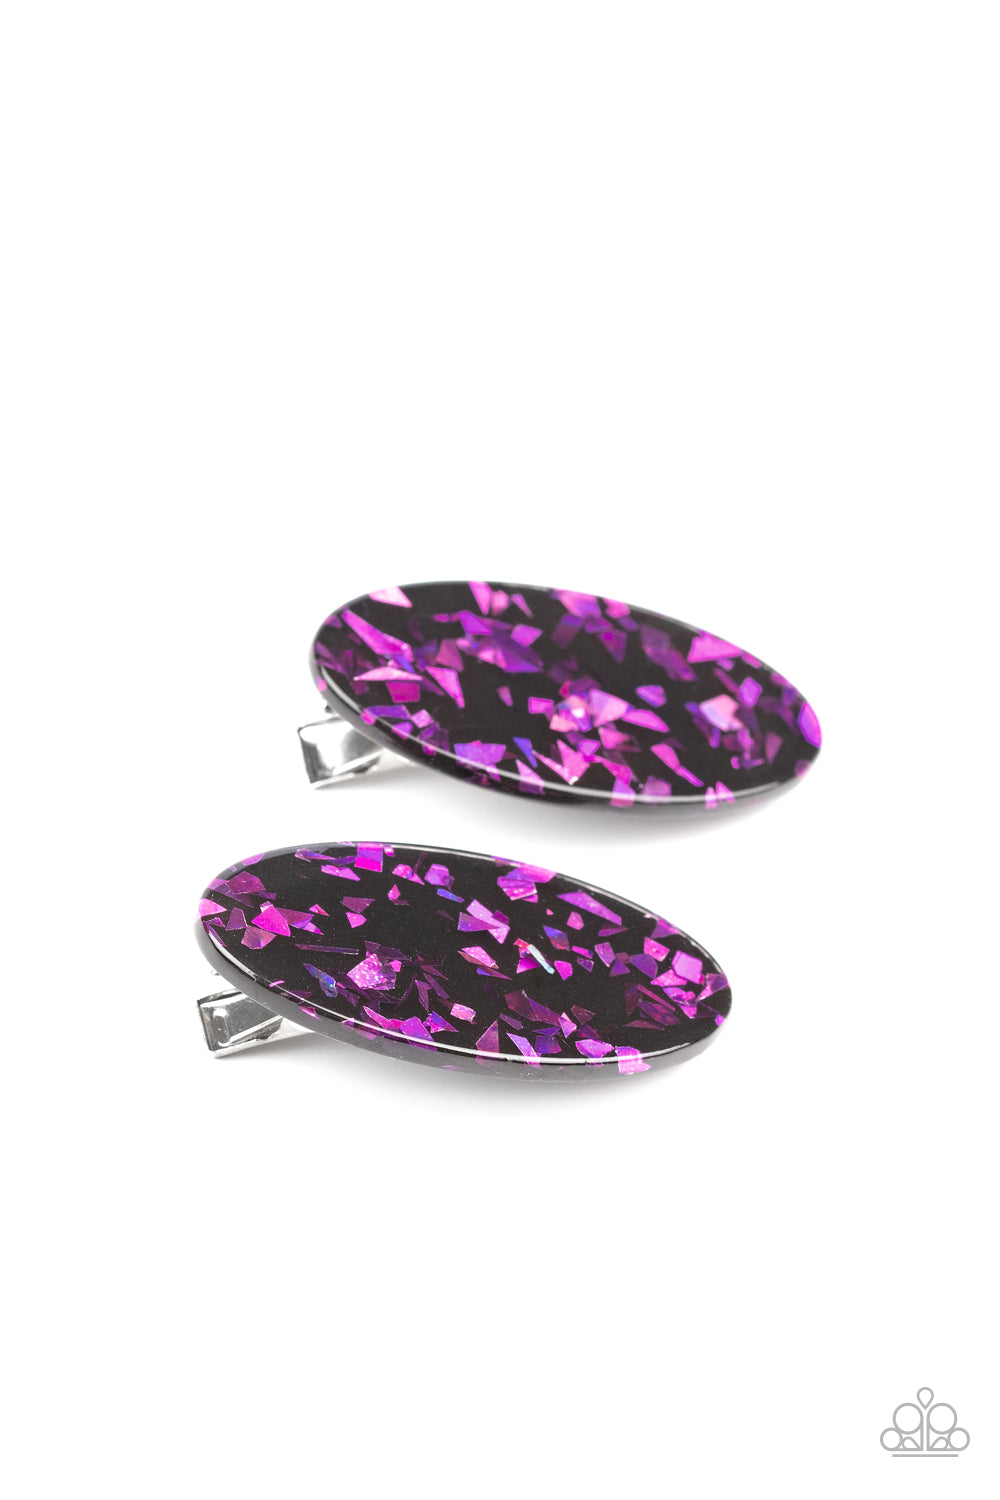 Get OVAL Yourself! Purple Hair Clip - Paparazzi Accessories